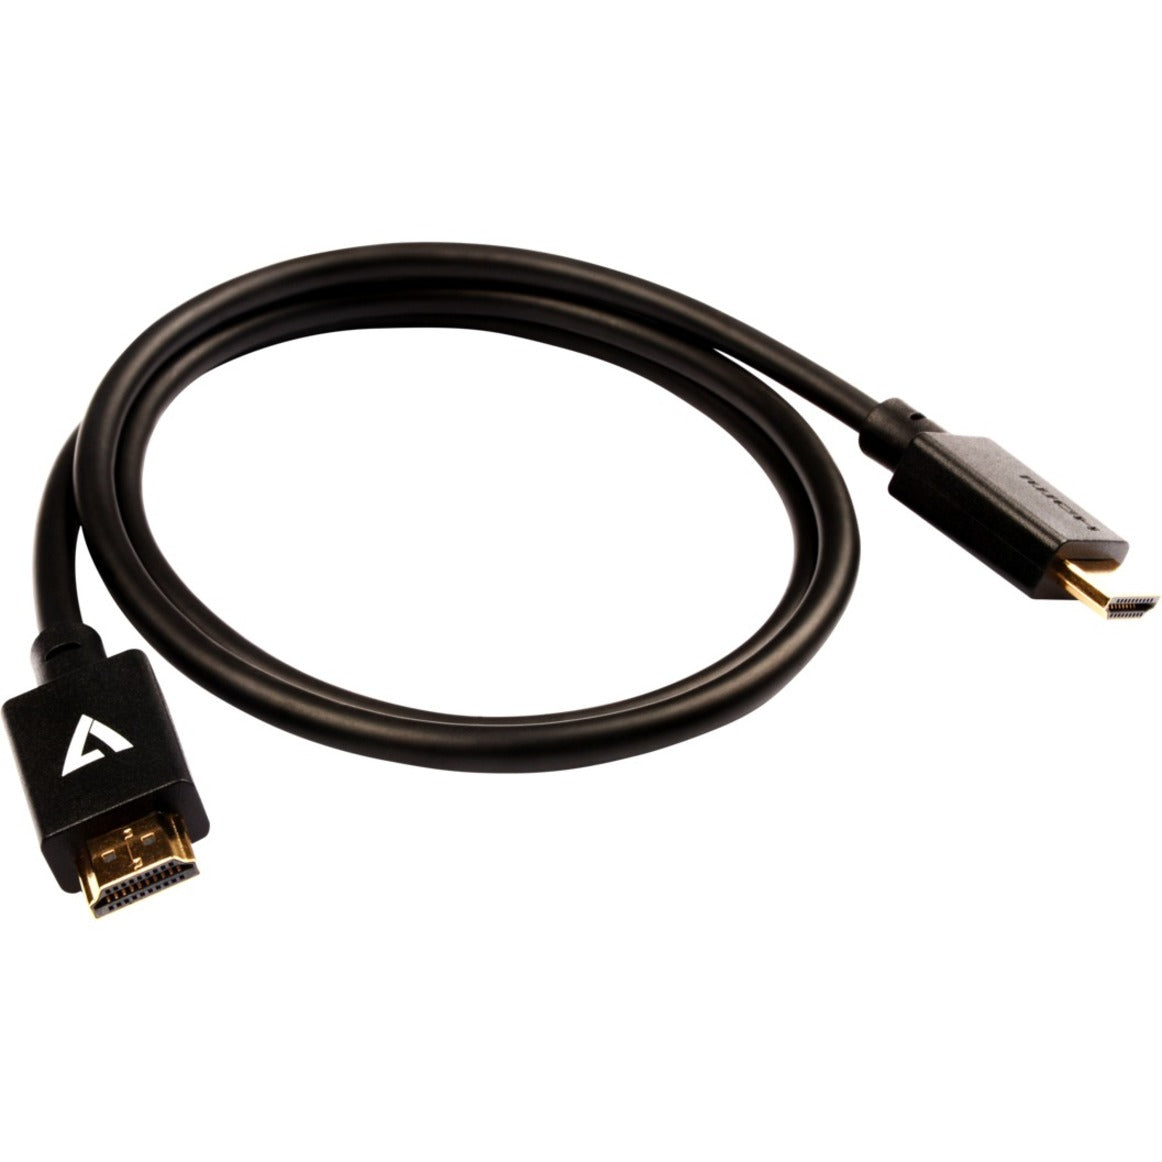 V7 V7HDMIPRO-1M-BLK Black Video Cable Pro HDMI Male to HDMI Male 1m 3.3ft, EMI/RF Protection, Corrosion Resistant, Strain Relief, Plug & Play